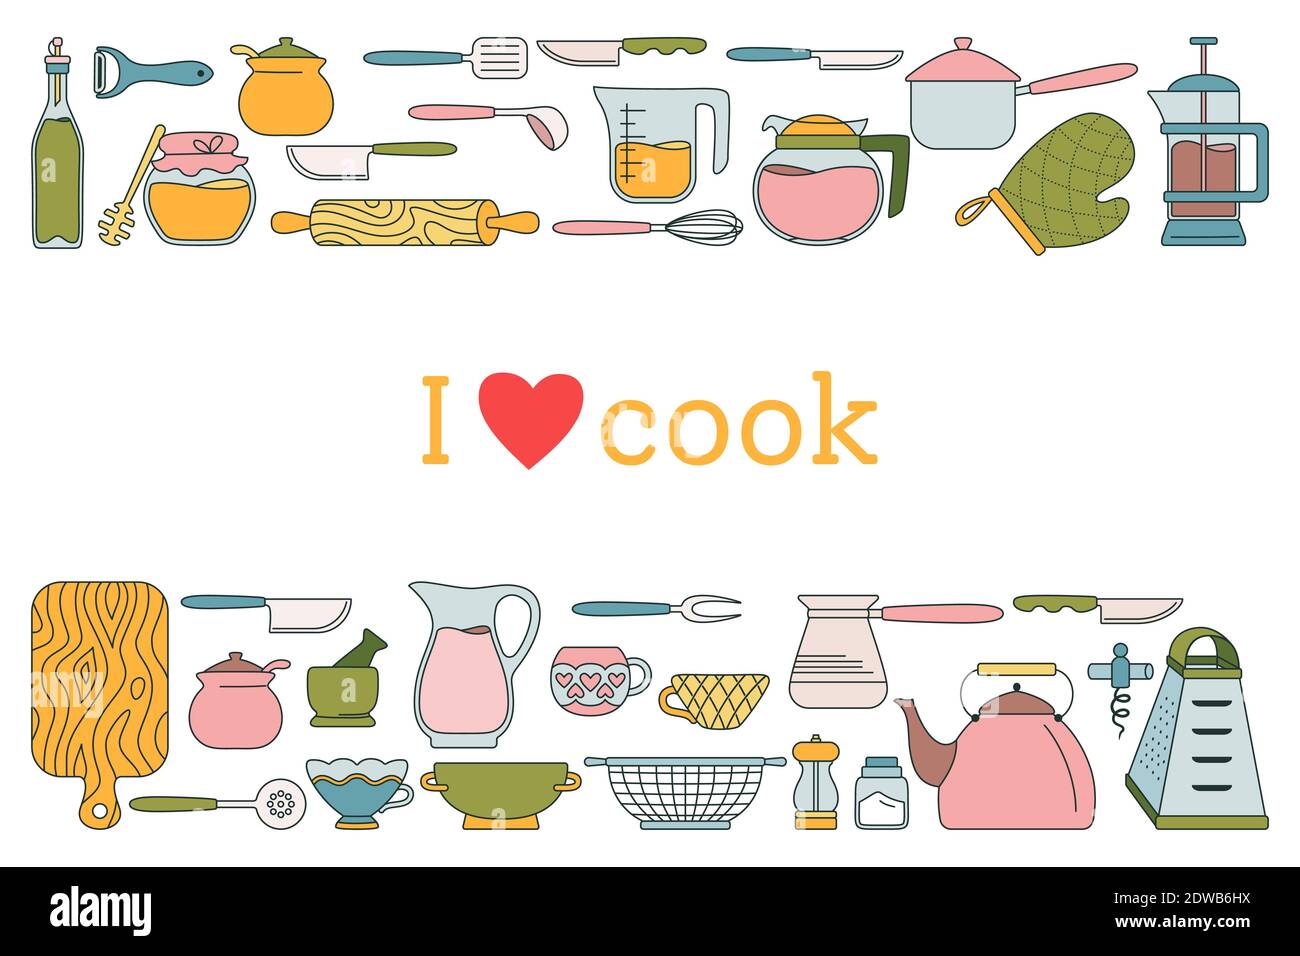 https://c8.alamy.com/comp/2DWB6HX/kitchen-tool-line-cartoon-illustration-modern-cooking-flat-bakingdishes-equipments-dishes-cup-tack-teapot-grater-pan-vector-kitchen-utensils-objects-food-preparation-i-love-cook-2DWB6HX.jpg